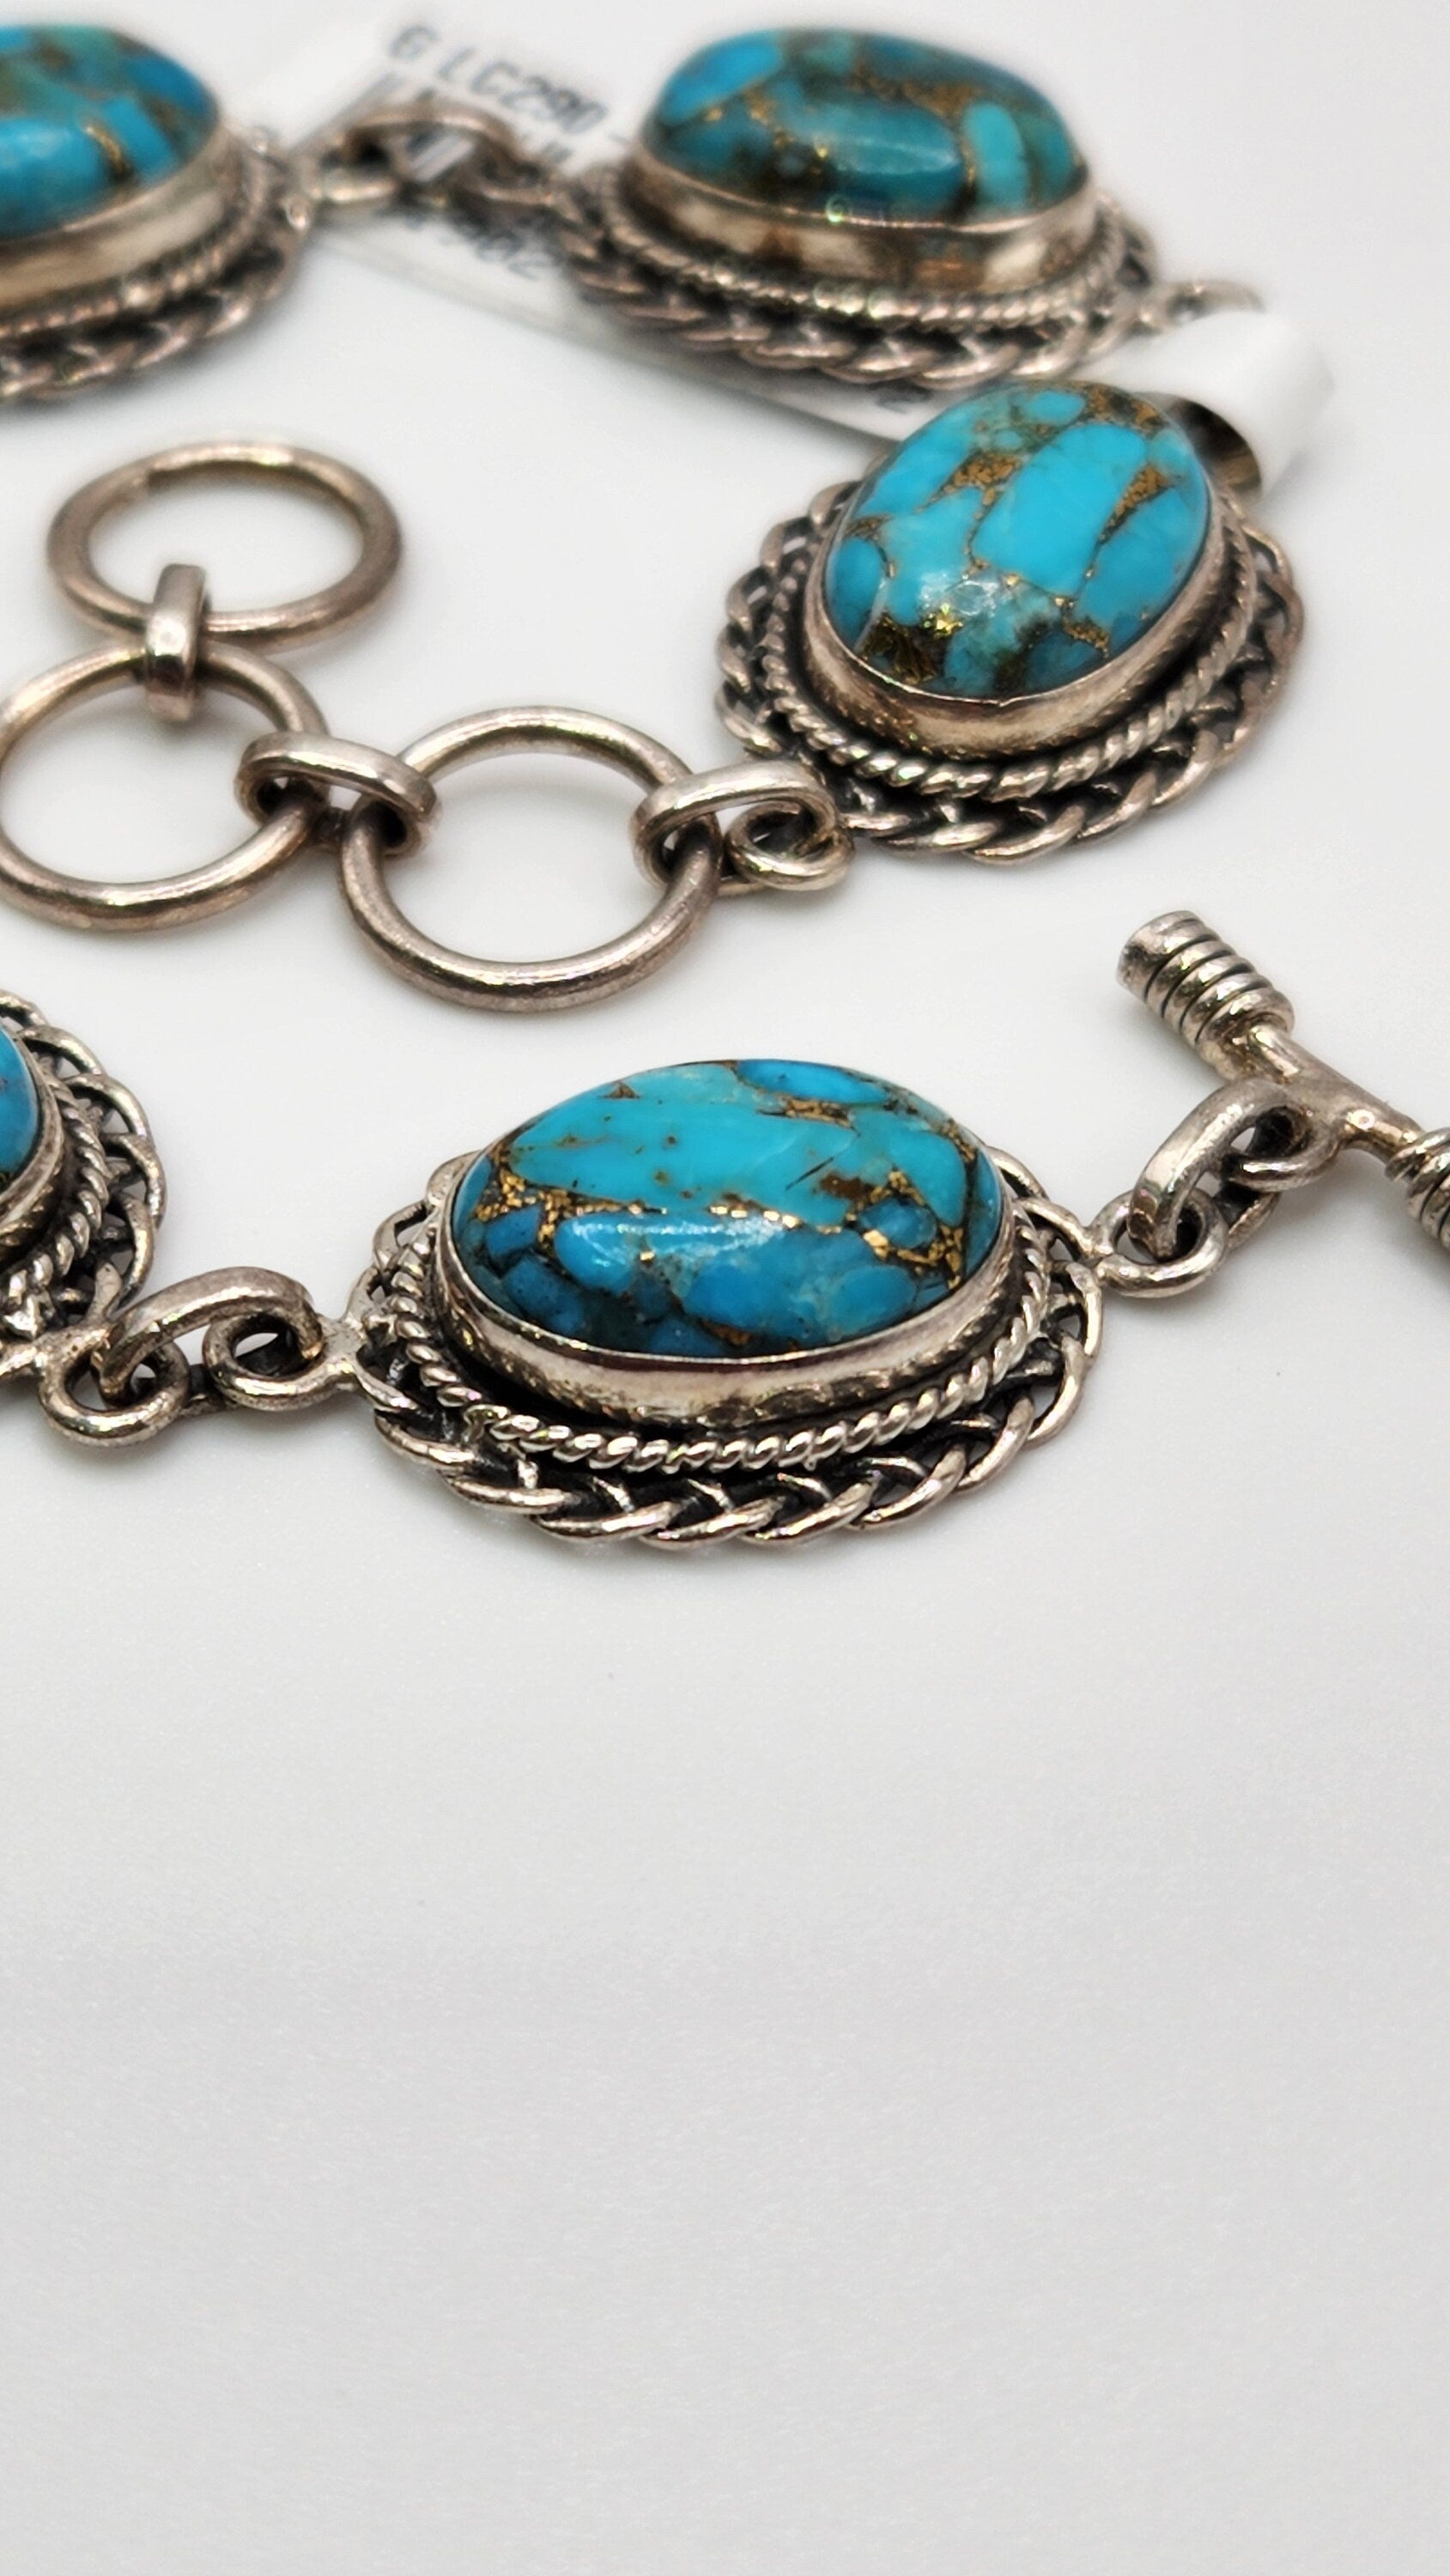 Genuine Turquoise and Silver Bracelet with Gold Inlay